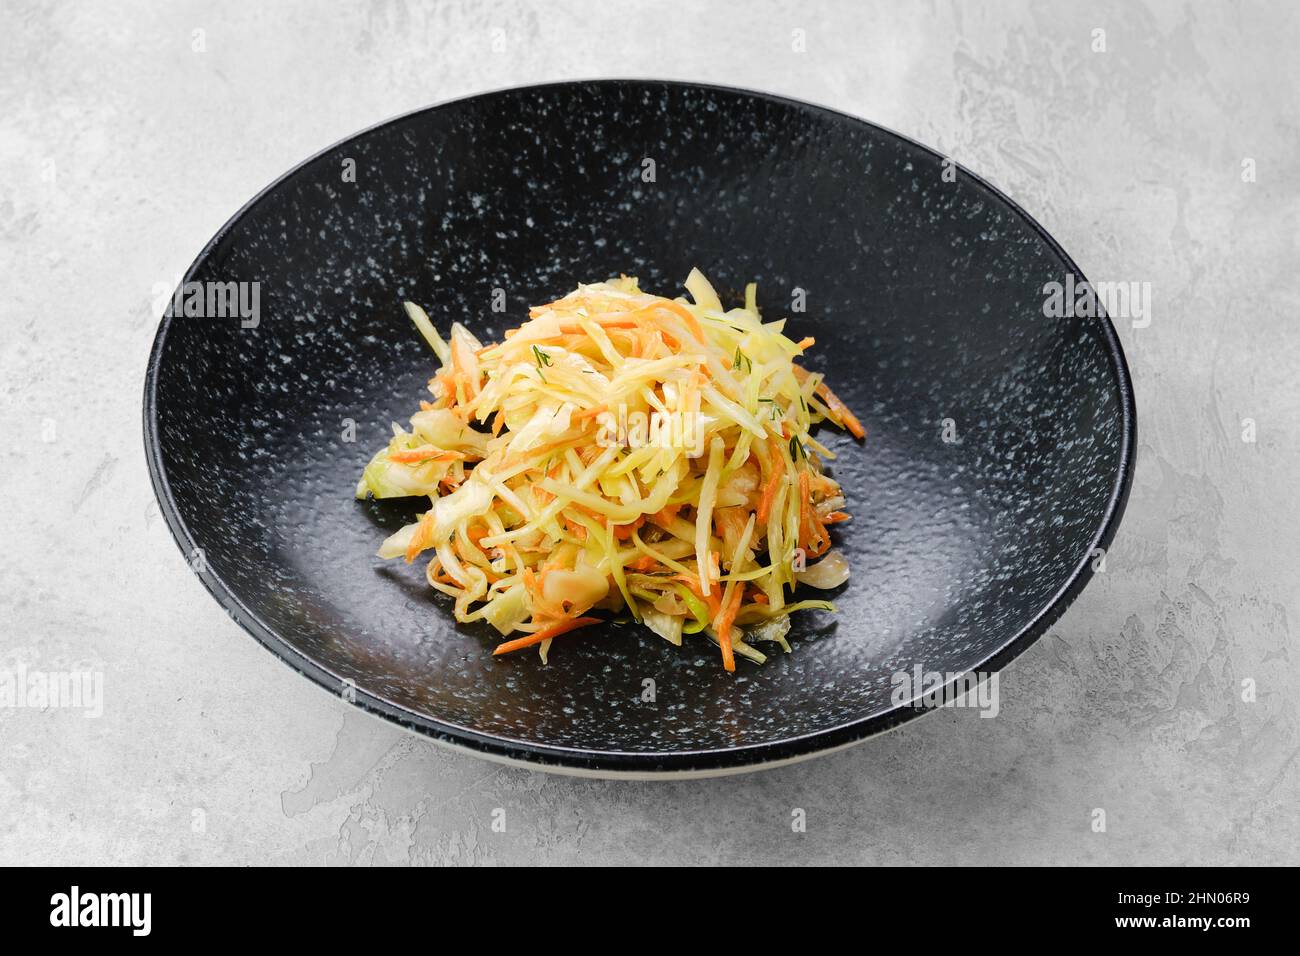 Pickled slices of cabbage and carrot on a plate Stock Photo